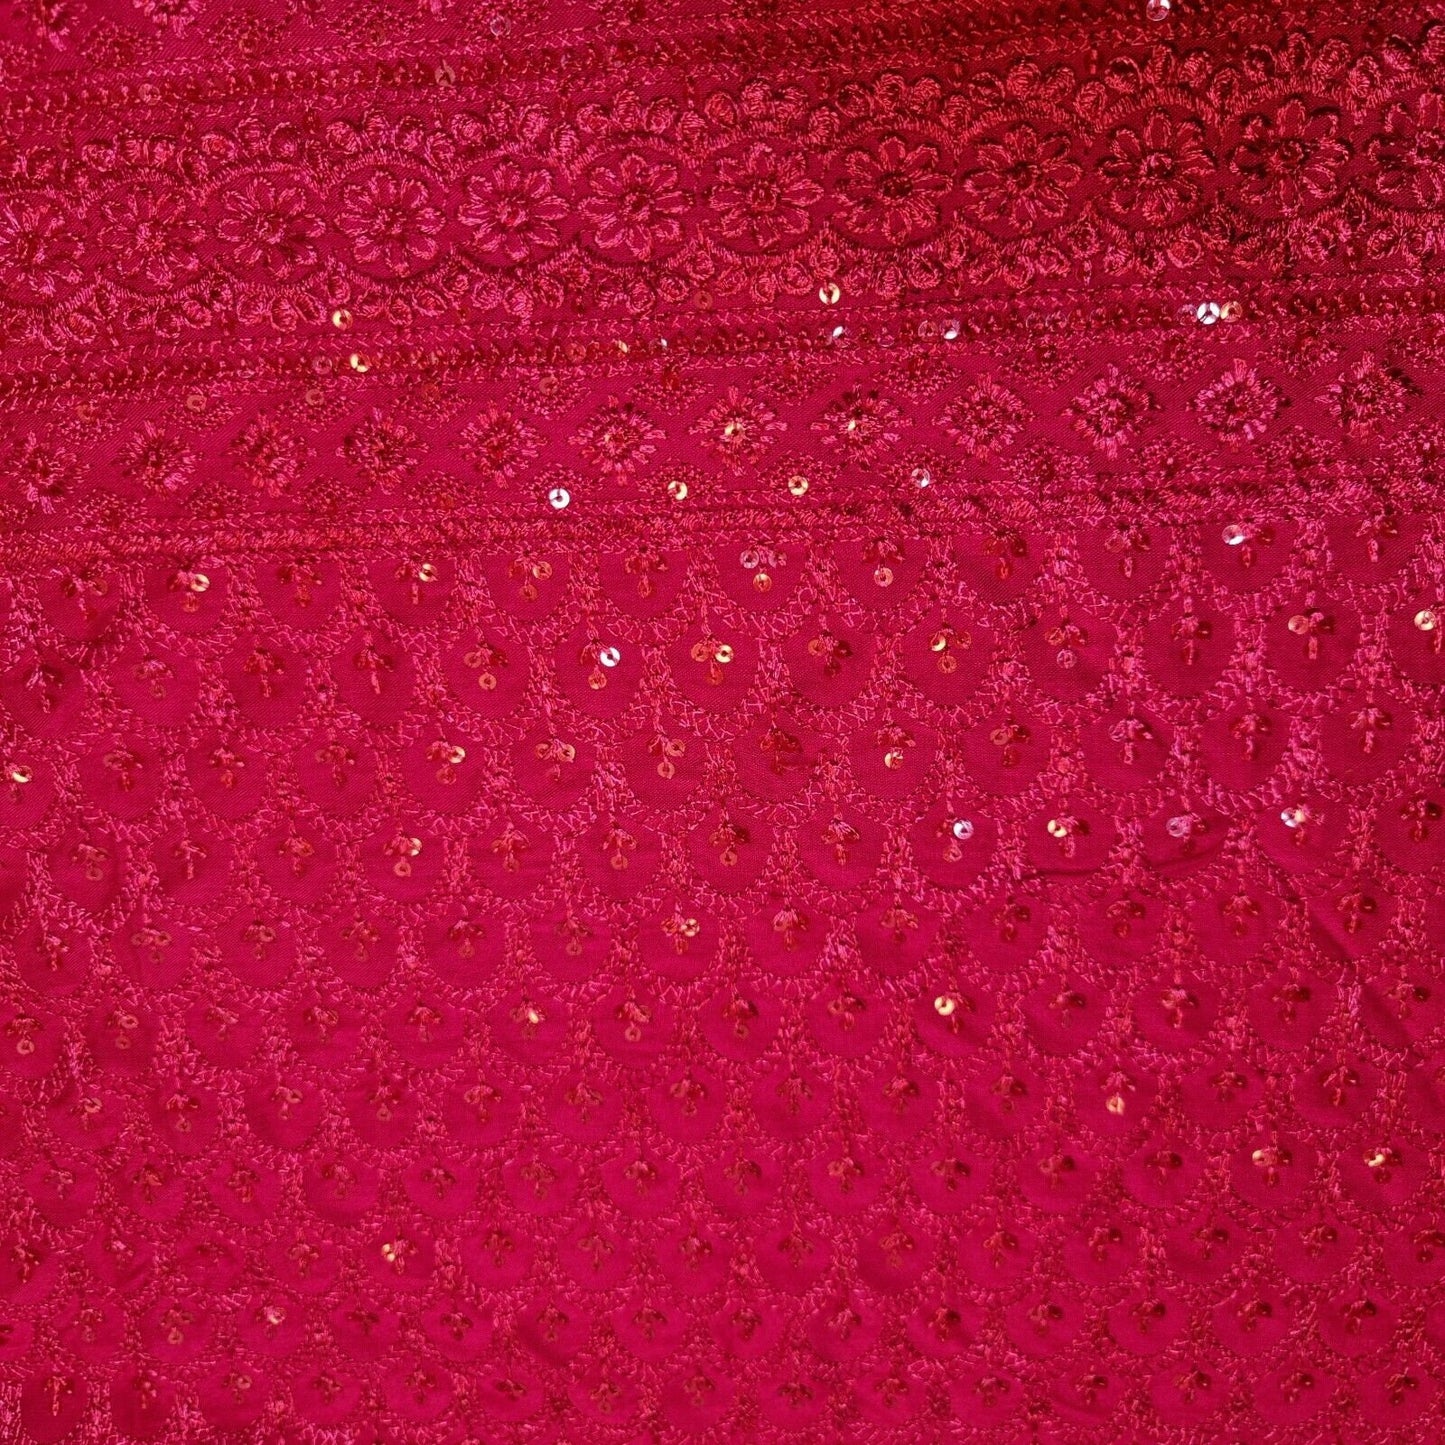 Broderie Anglais Sequin Embroidery ANGLAISE Soft Viscose Dress Craft Fabric 44" (Cerise Pink)